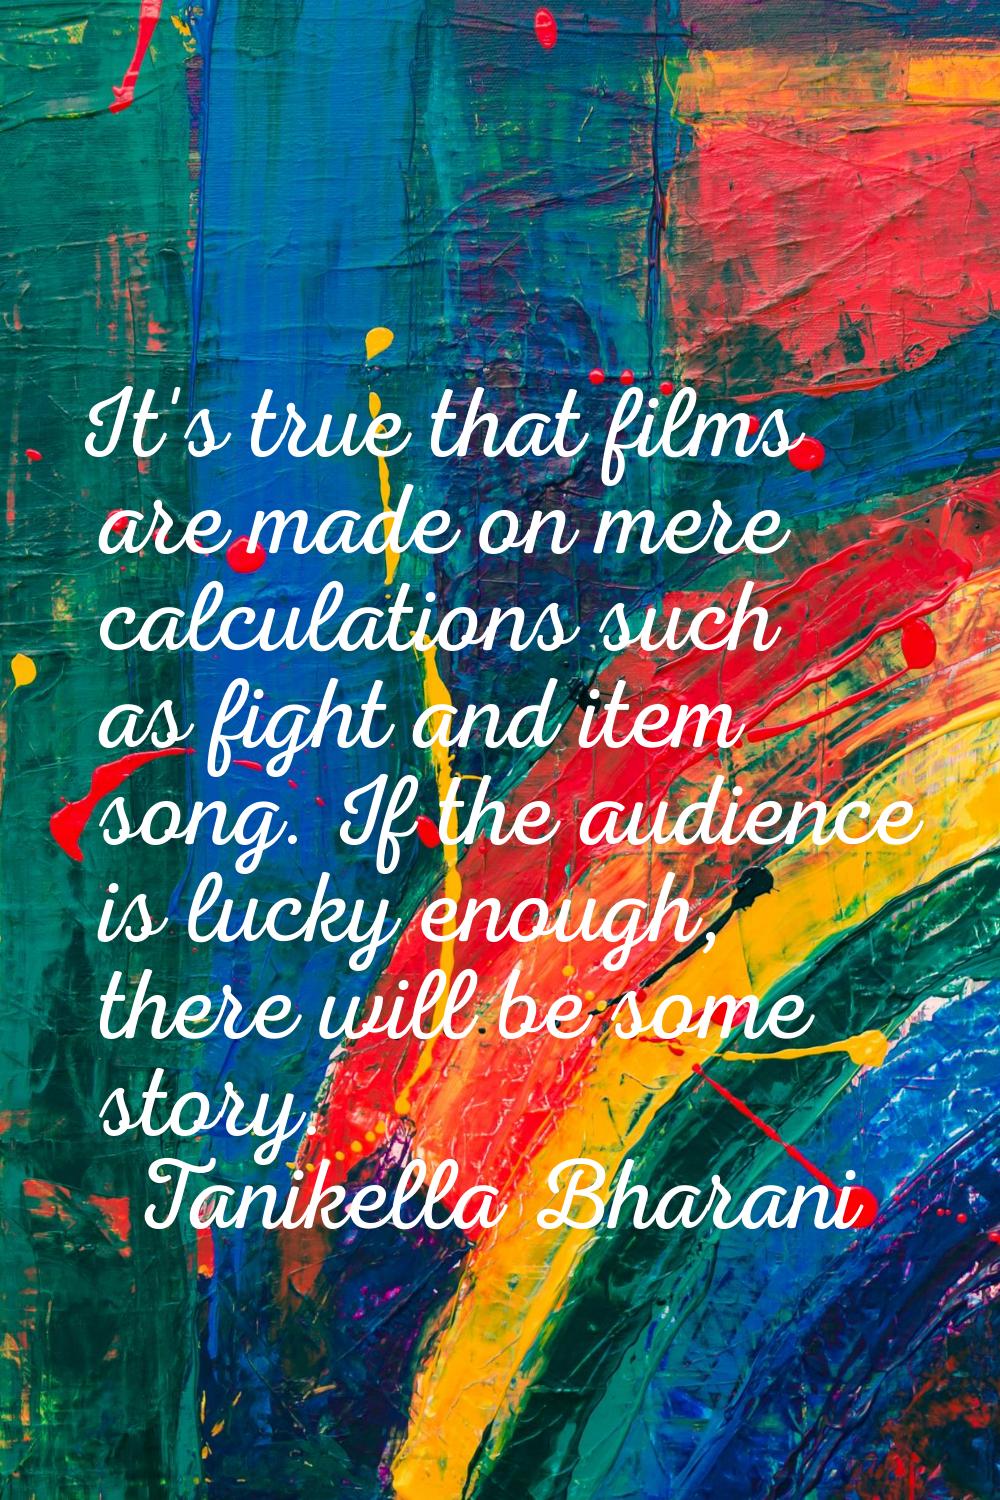 It's true that films are made on mere calculations such as fight and item song. If the audience is 